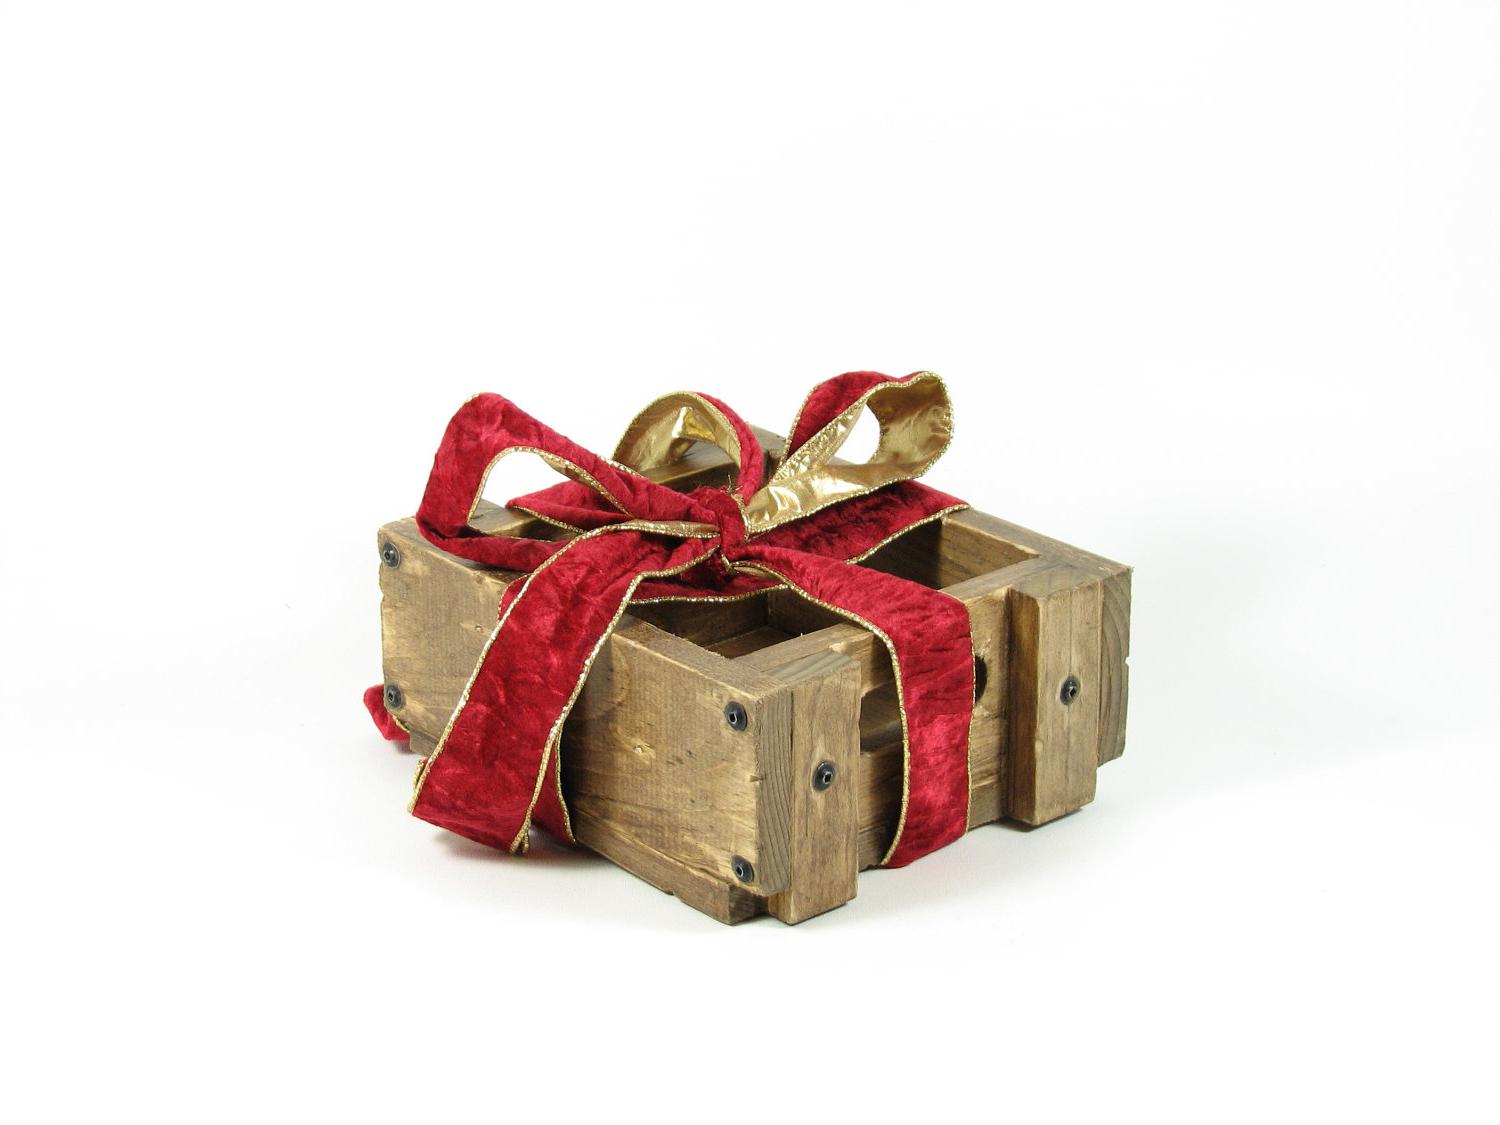 Wood Crate Wooden Box Gift Box